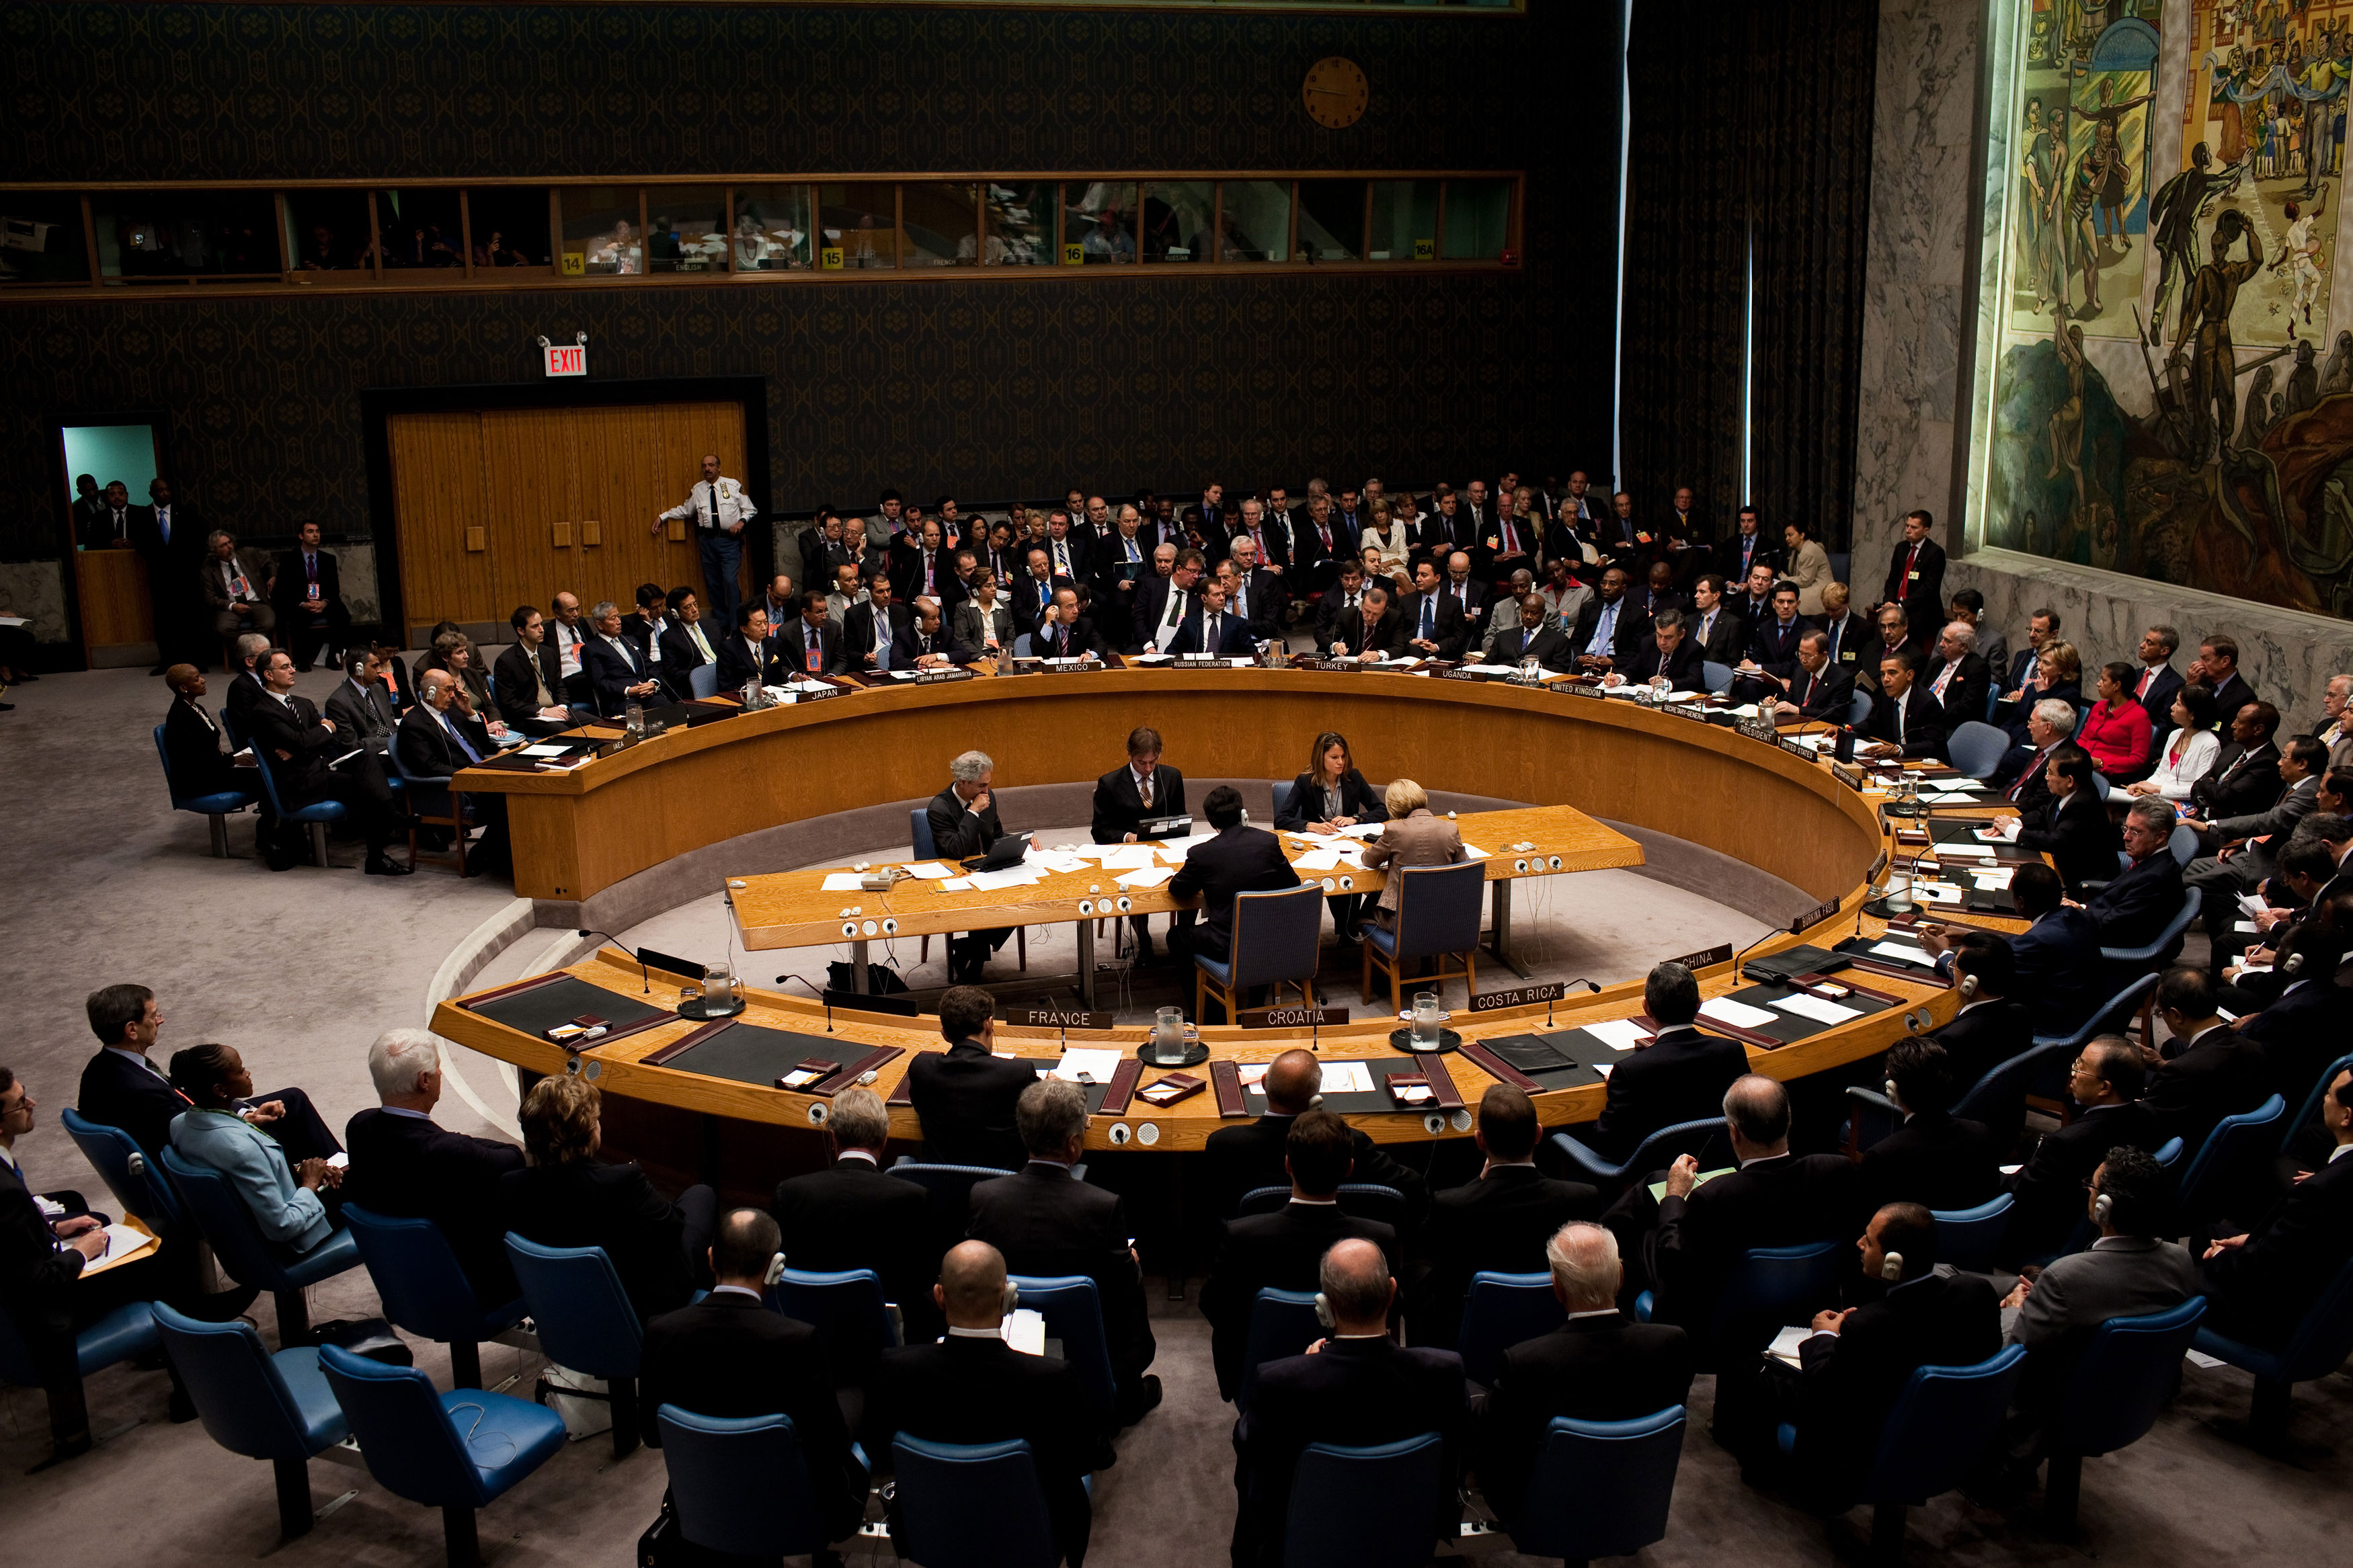 Recapping the United Nations Security Council Climate Security Debate